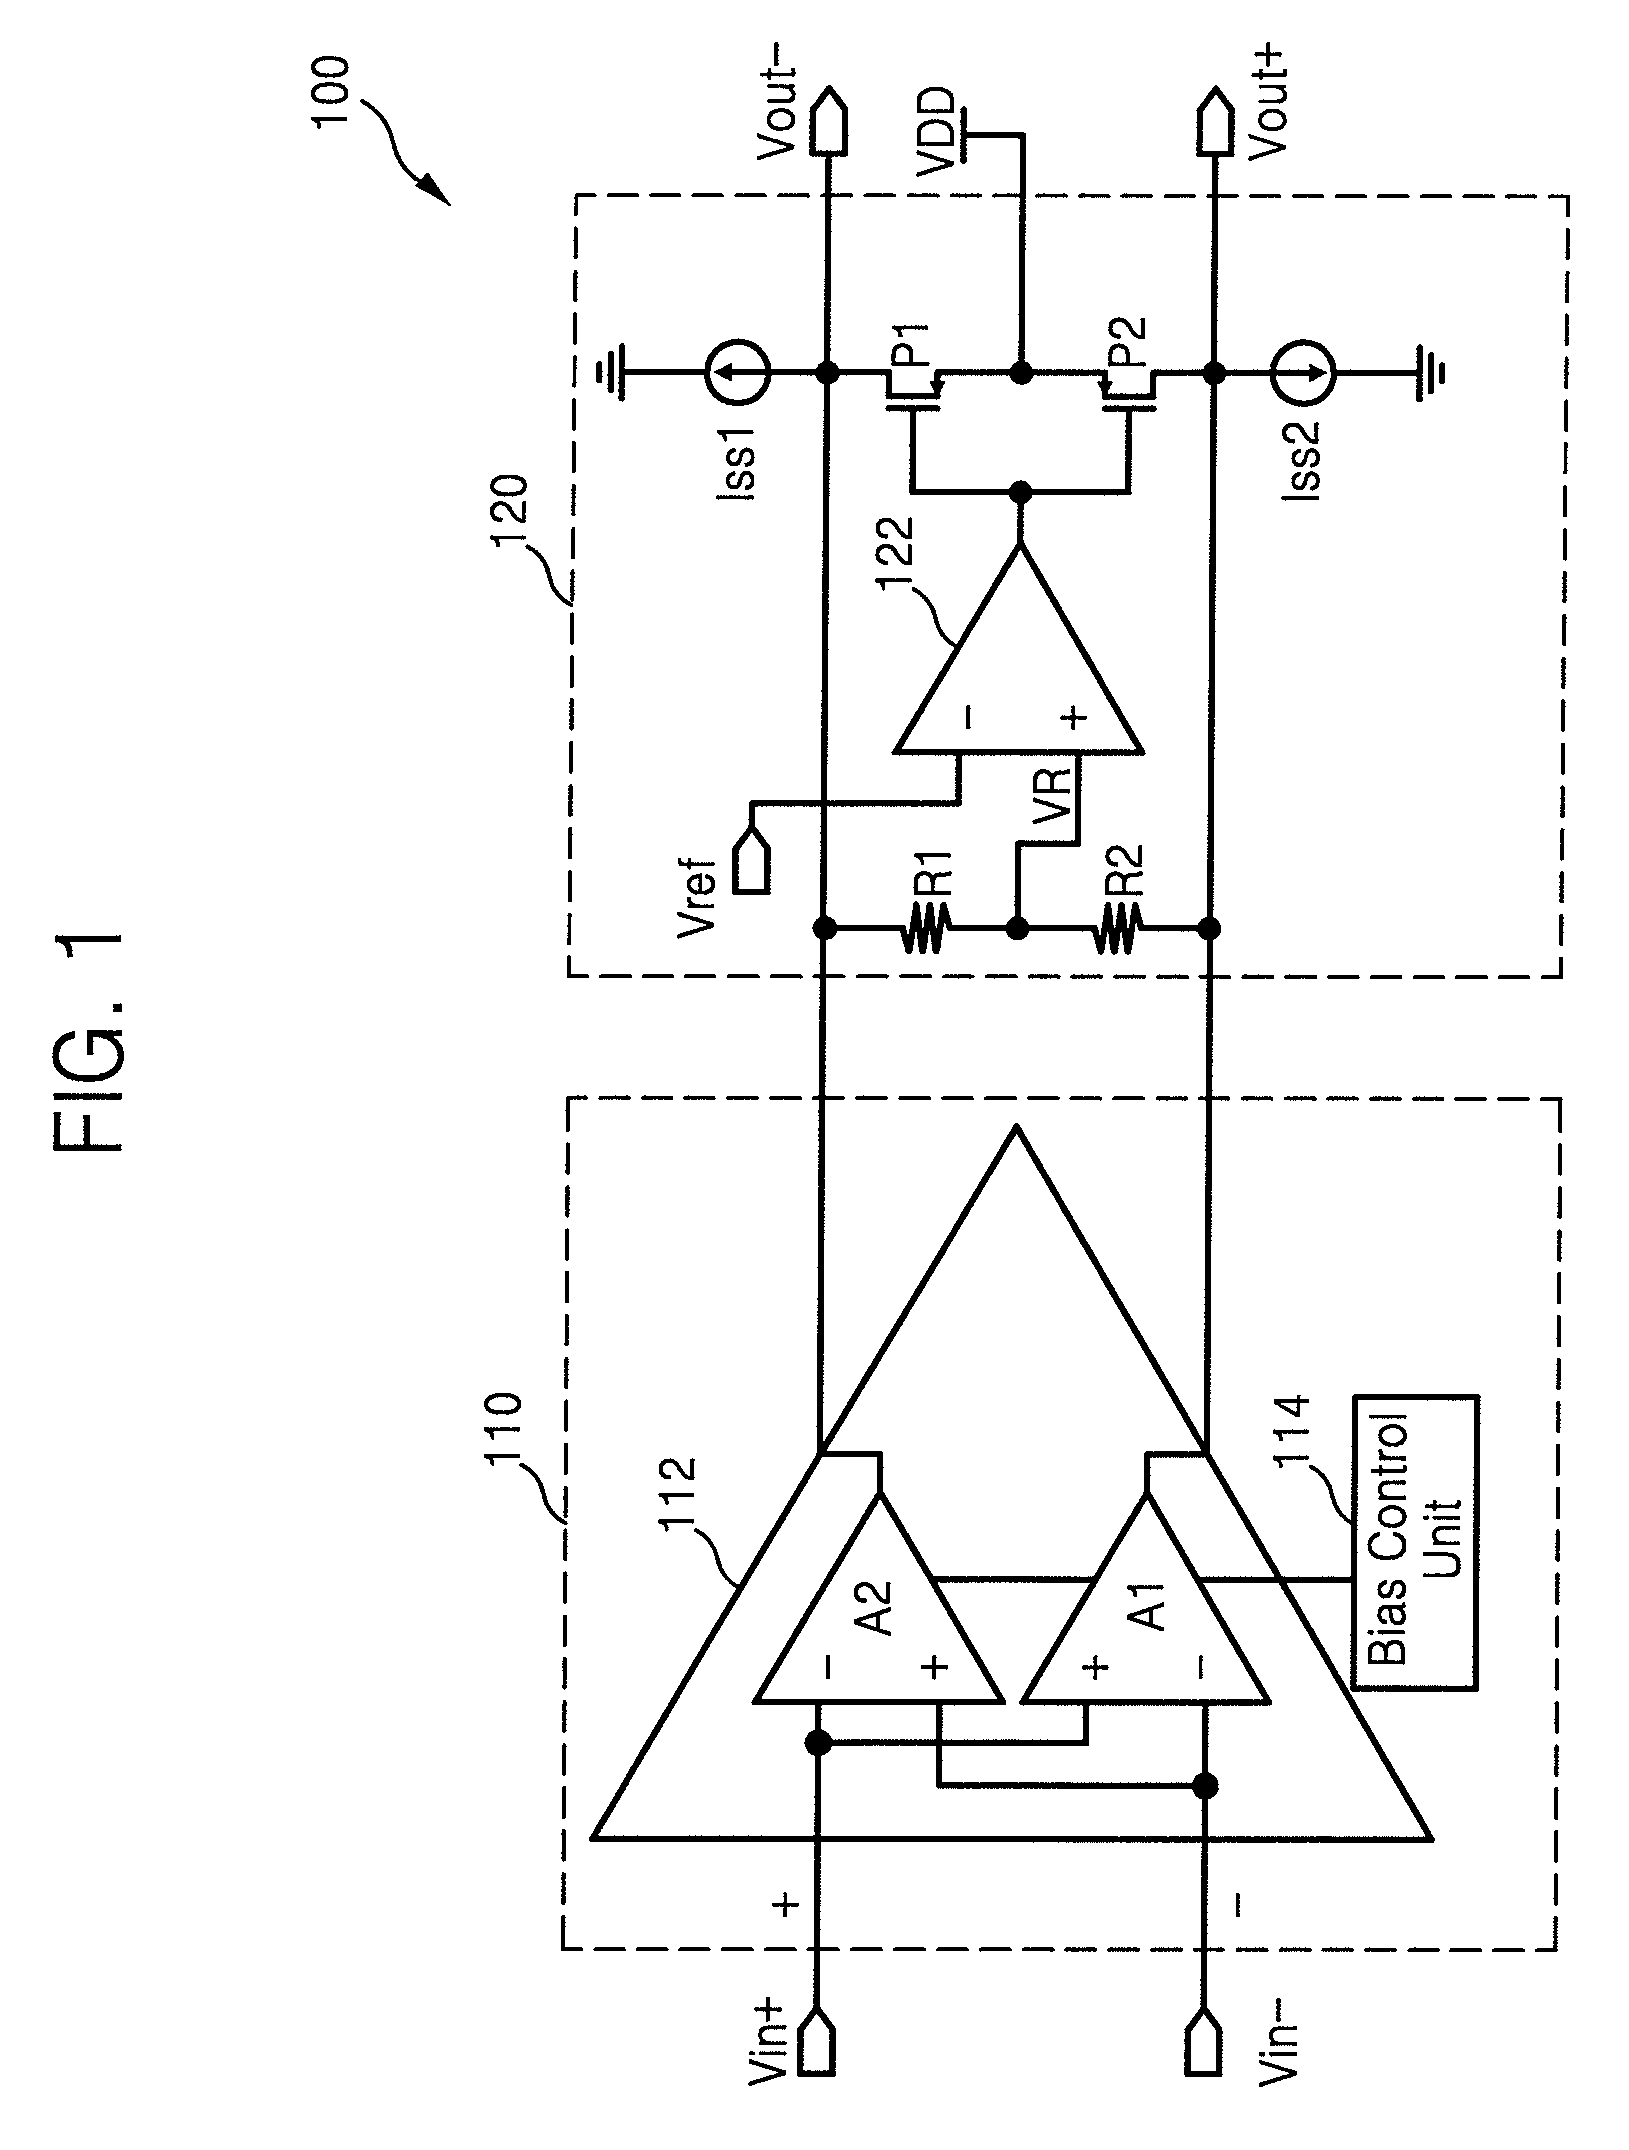 Fully differential class AB amplifier and amplifying method using single-ended, two-stage amplifier